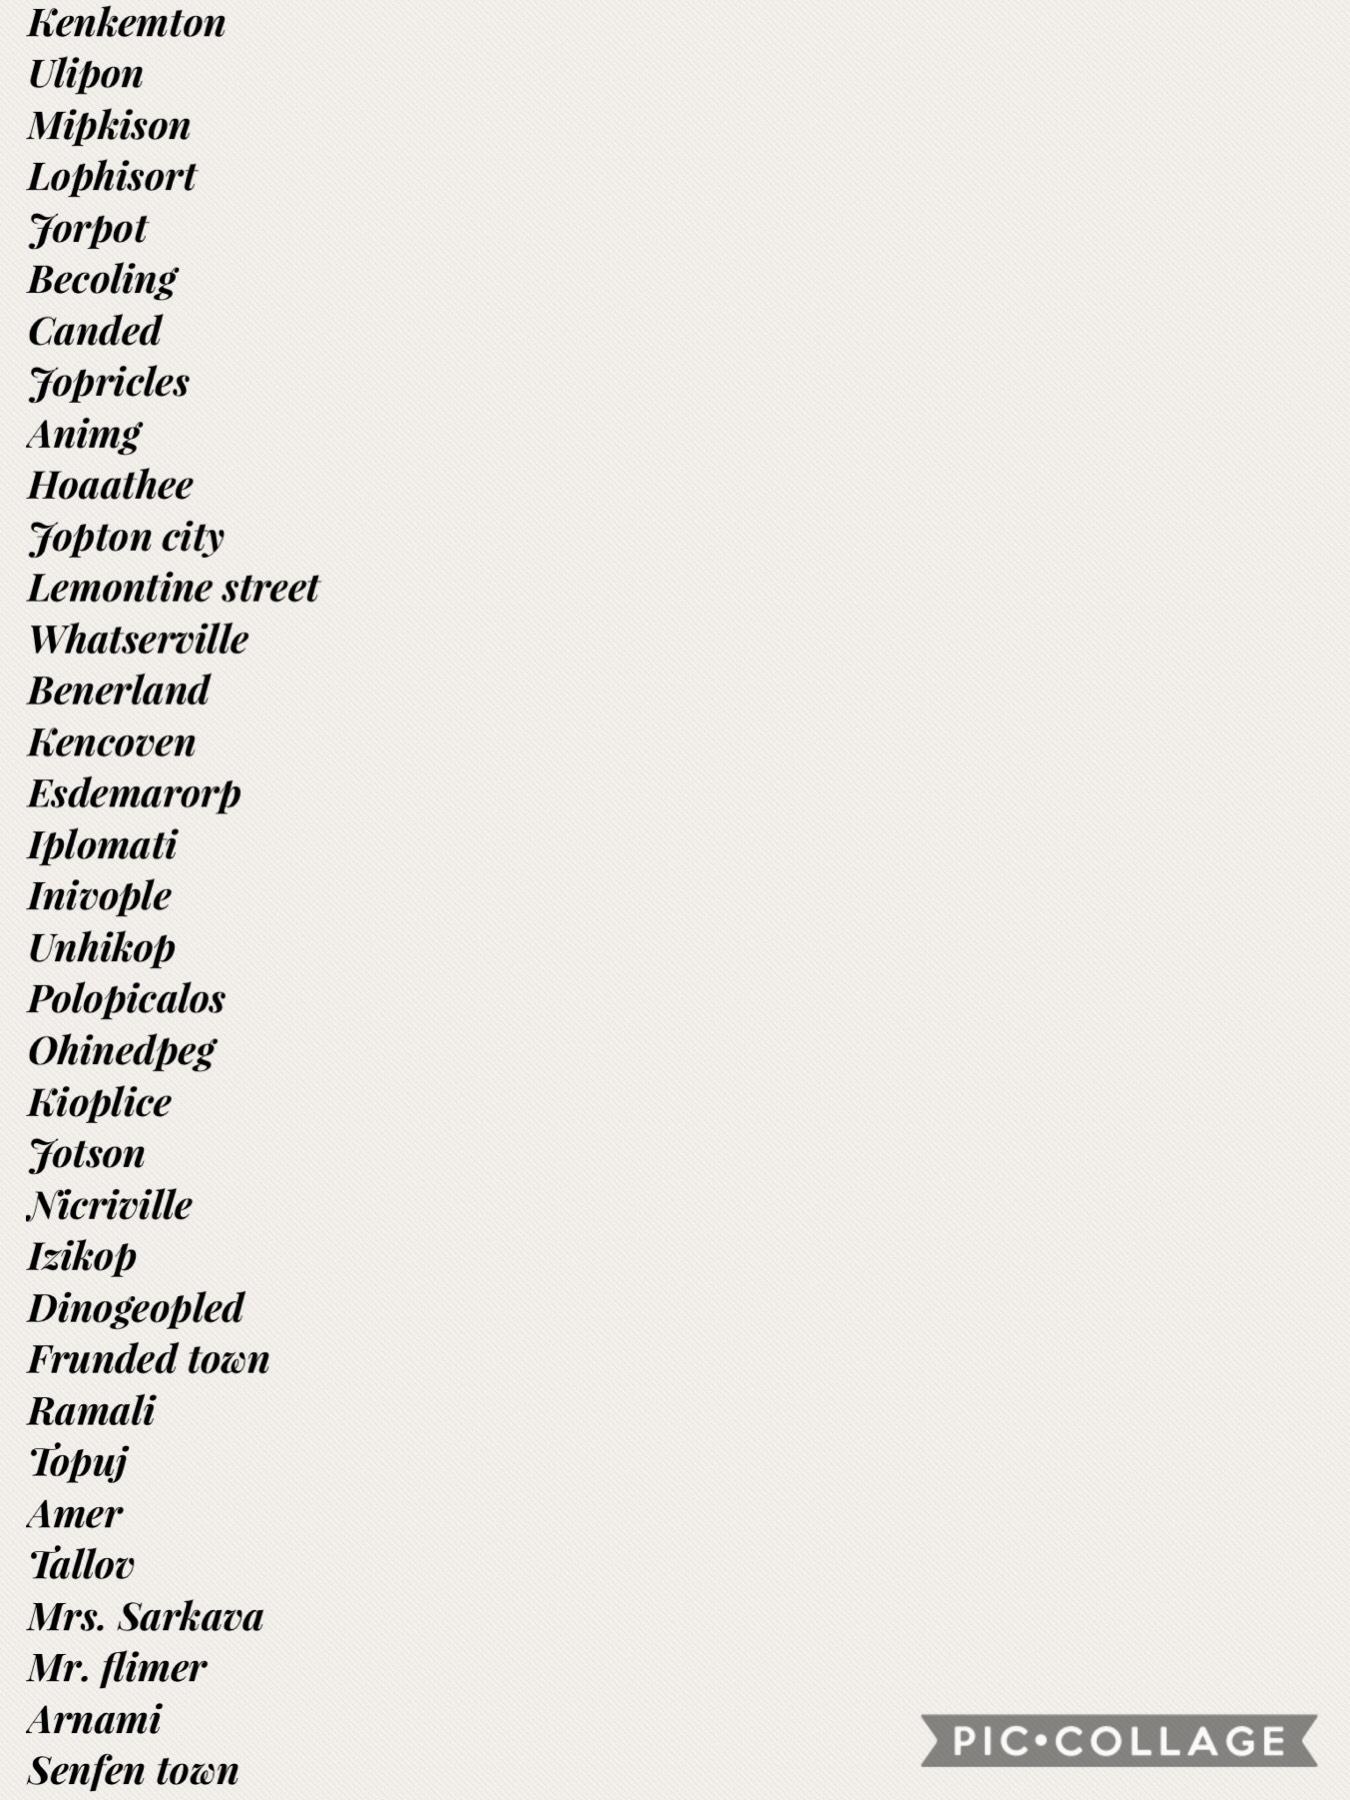 Hey guys! Here are some names of people and places! You can use them in a book your writing or on an essay! Thx!